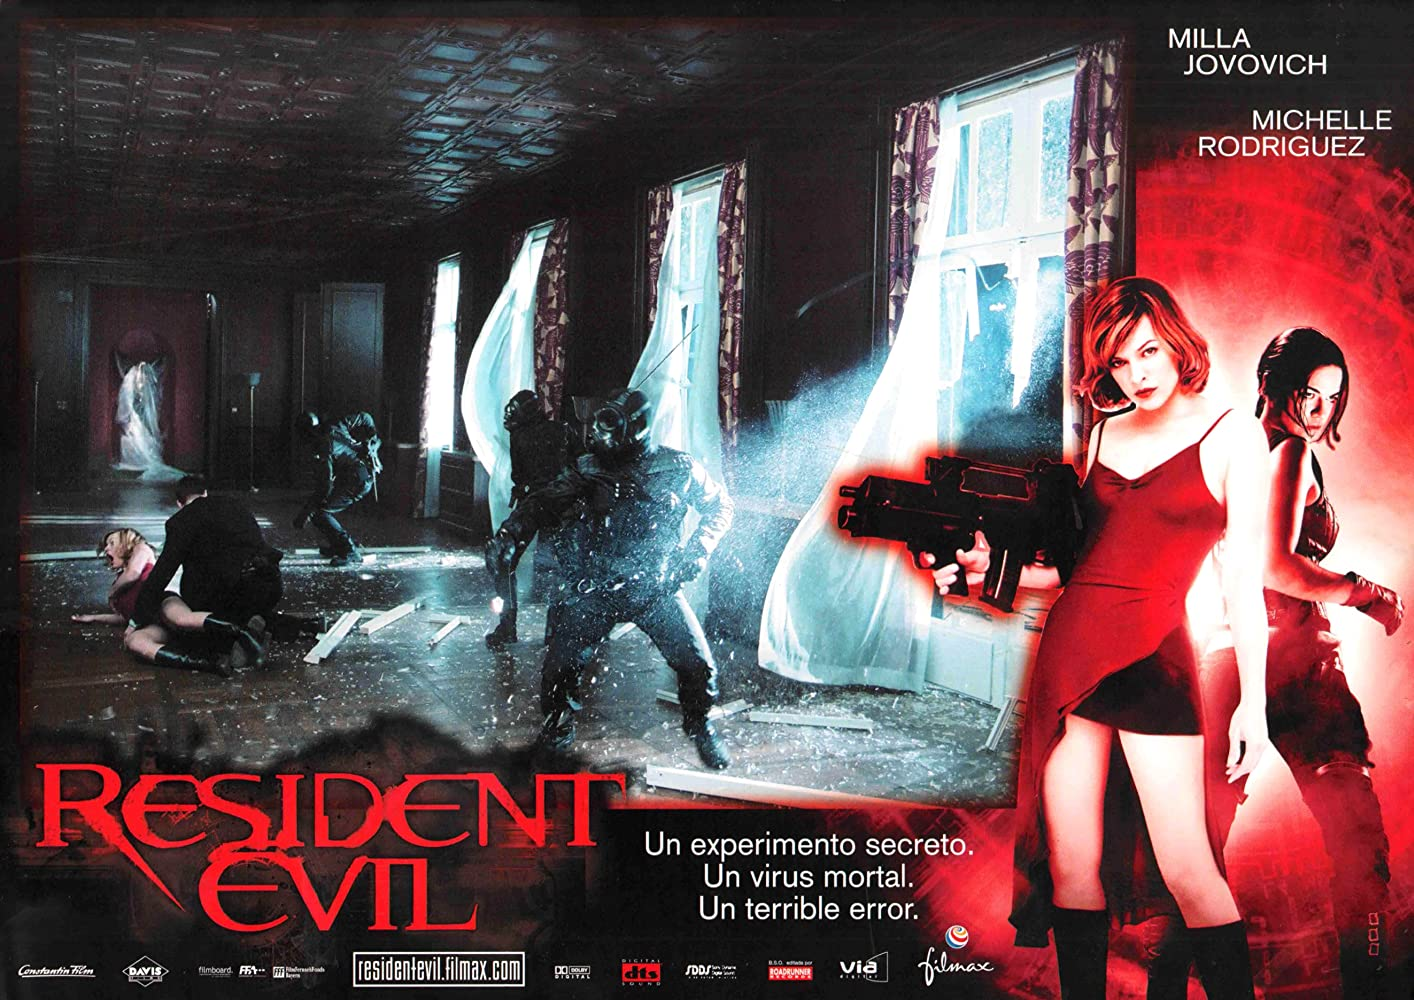 The Action-Horror Appeal of Paul W.S. Anderson's 'Resident Evil